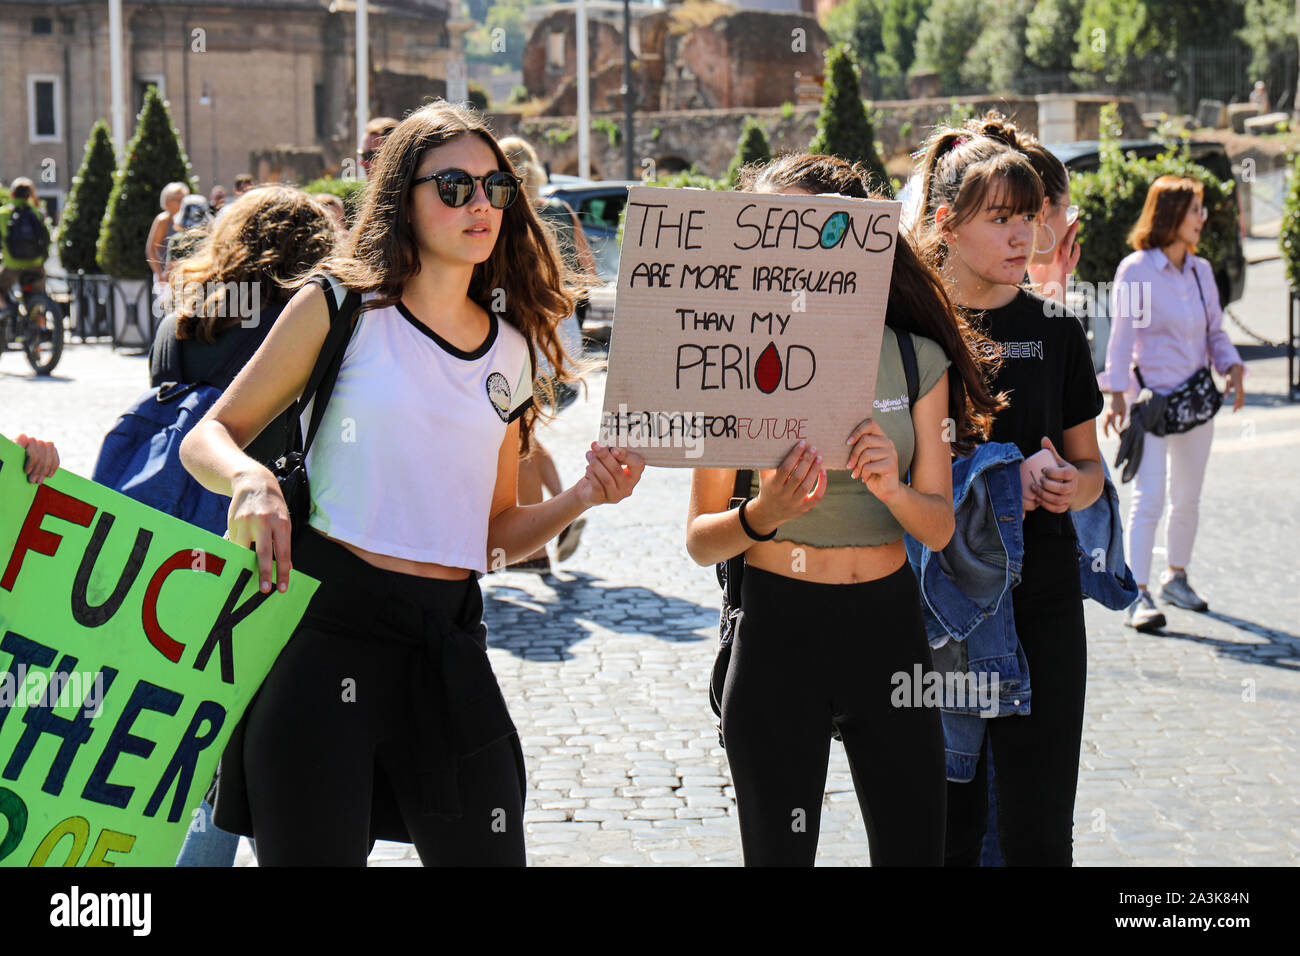 27 Sep 2019. Fridays for future. School strike for climate. Italian teenagers holding a placard in Rome, Italy. Stock Photo